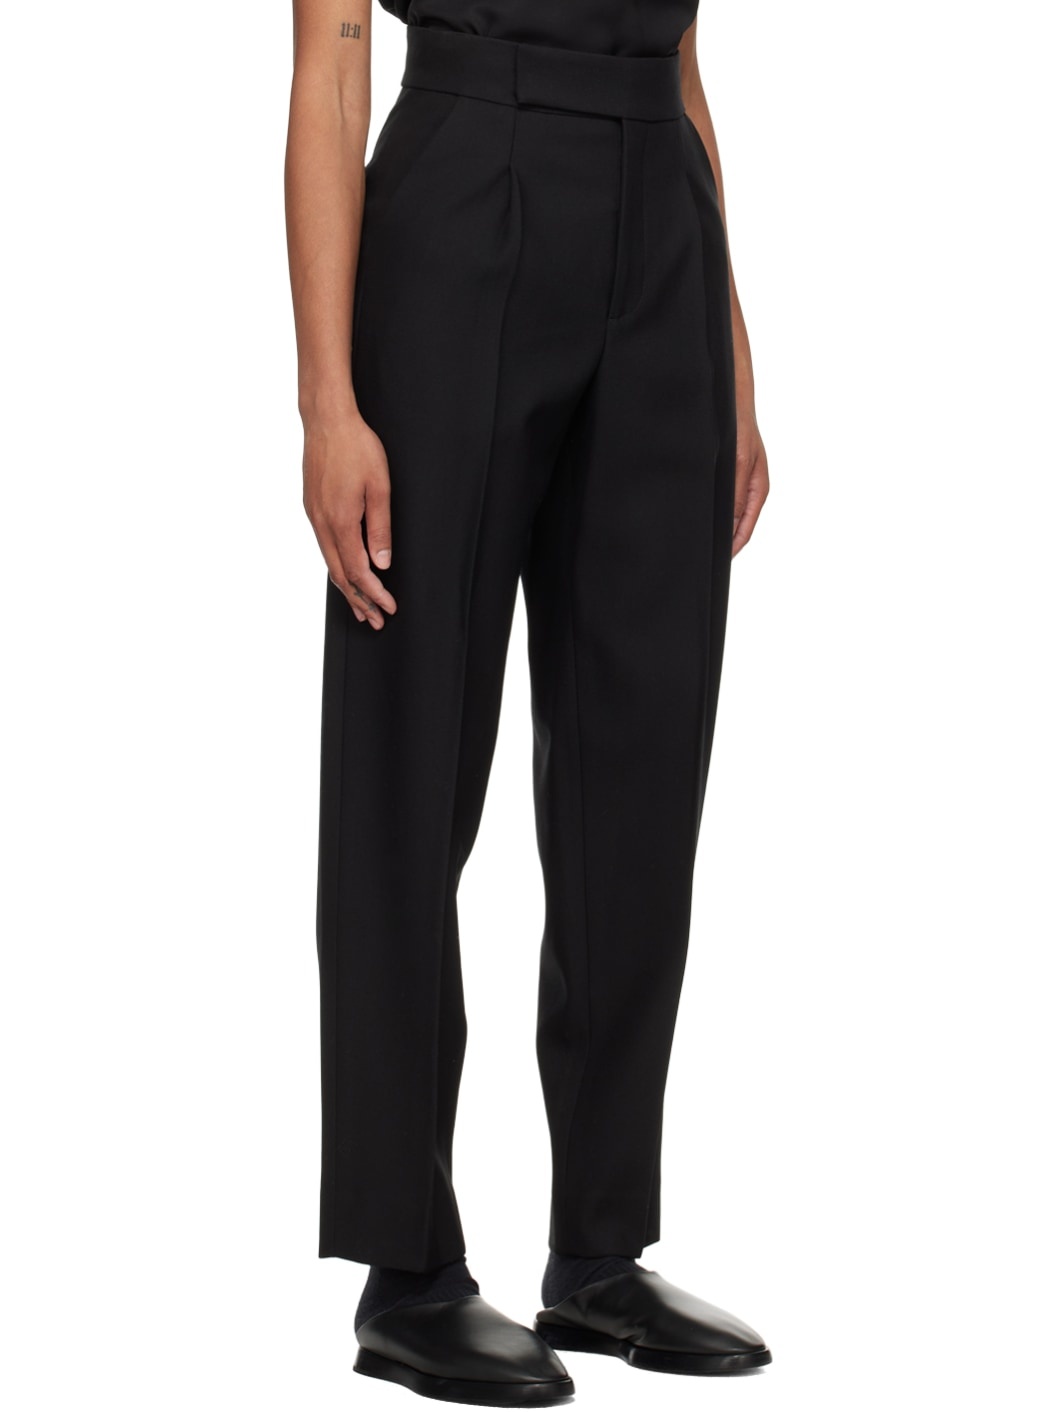 Black Tapered Trousers - 2